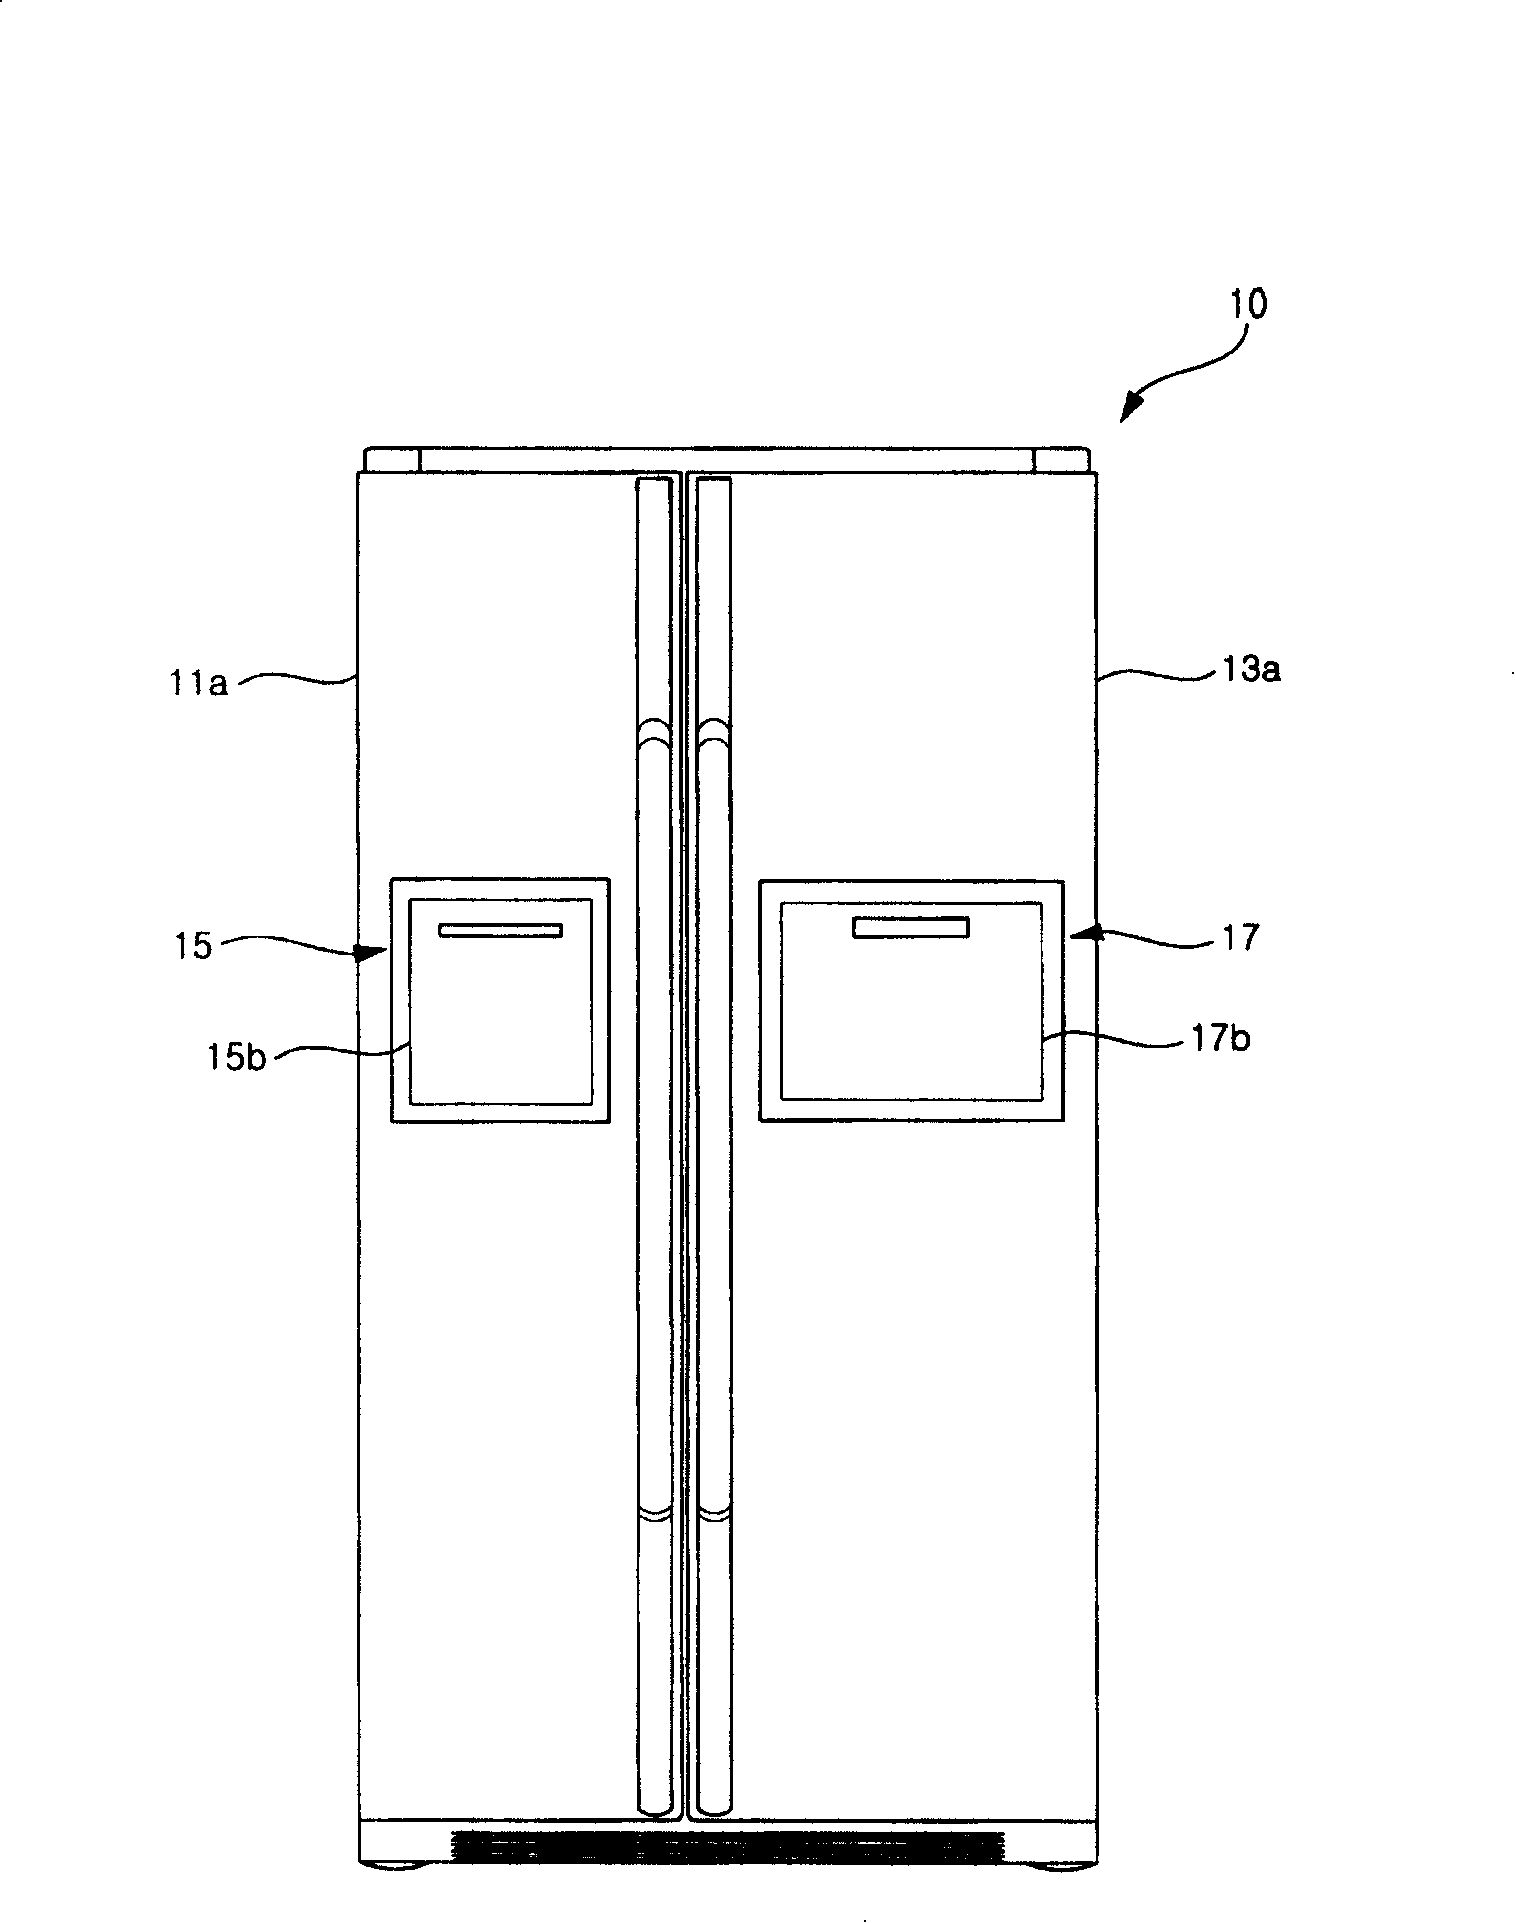 Ice-making apparatus for refrigerator